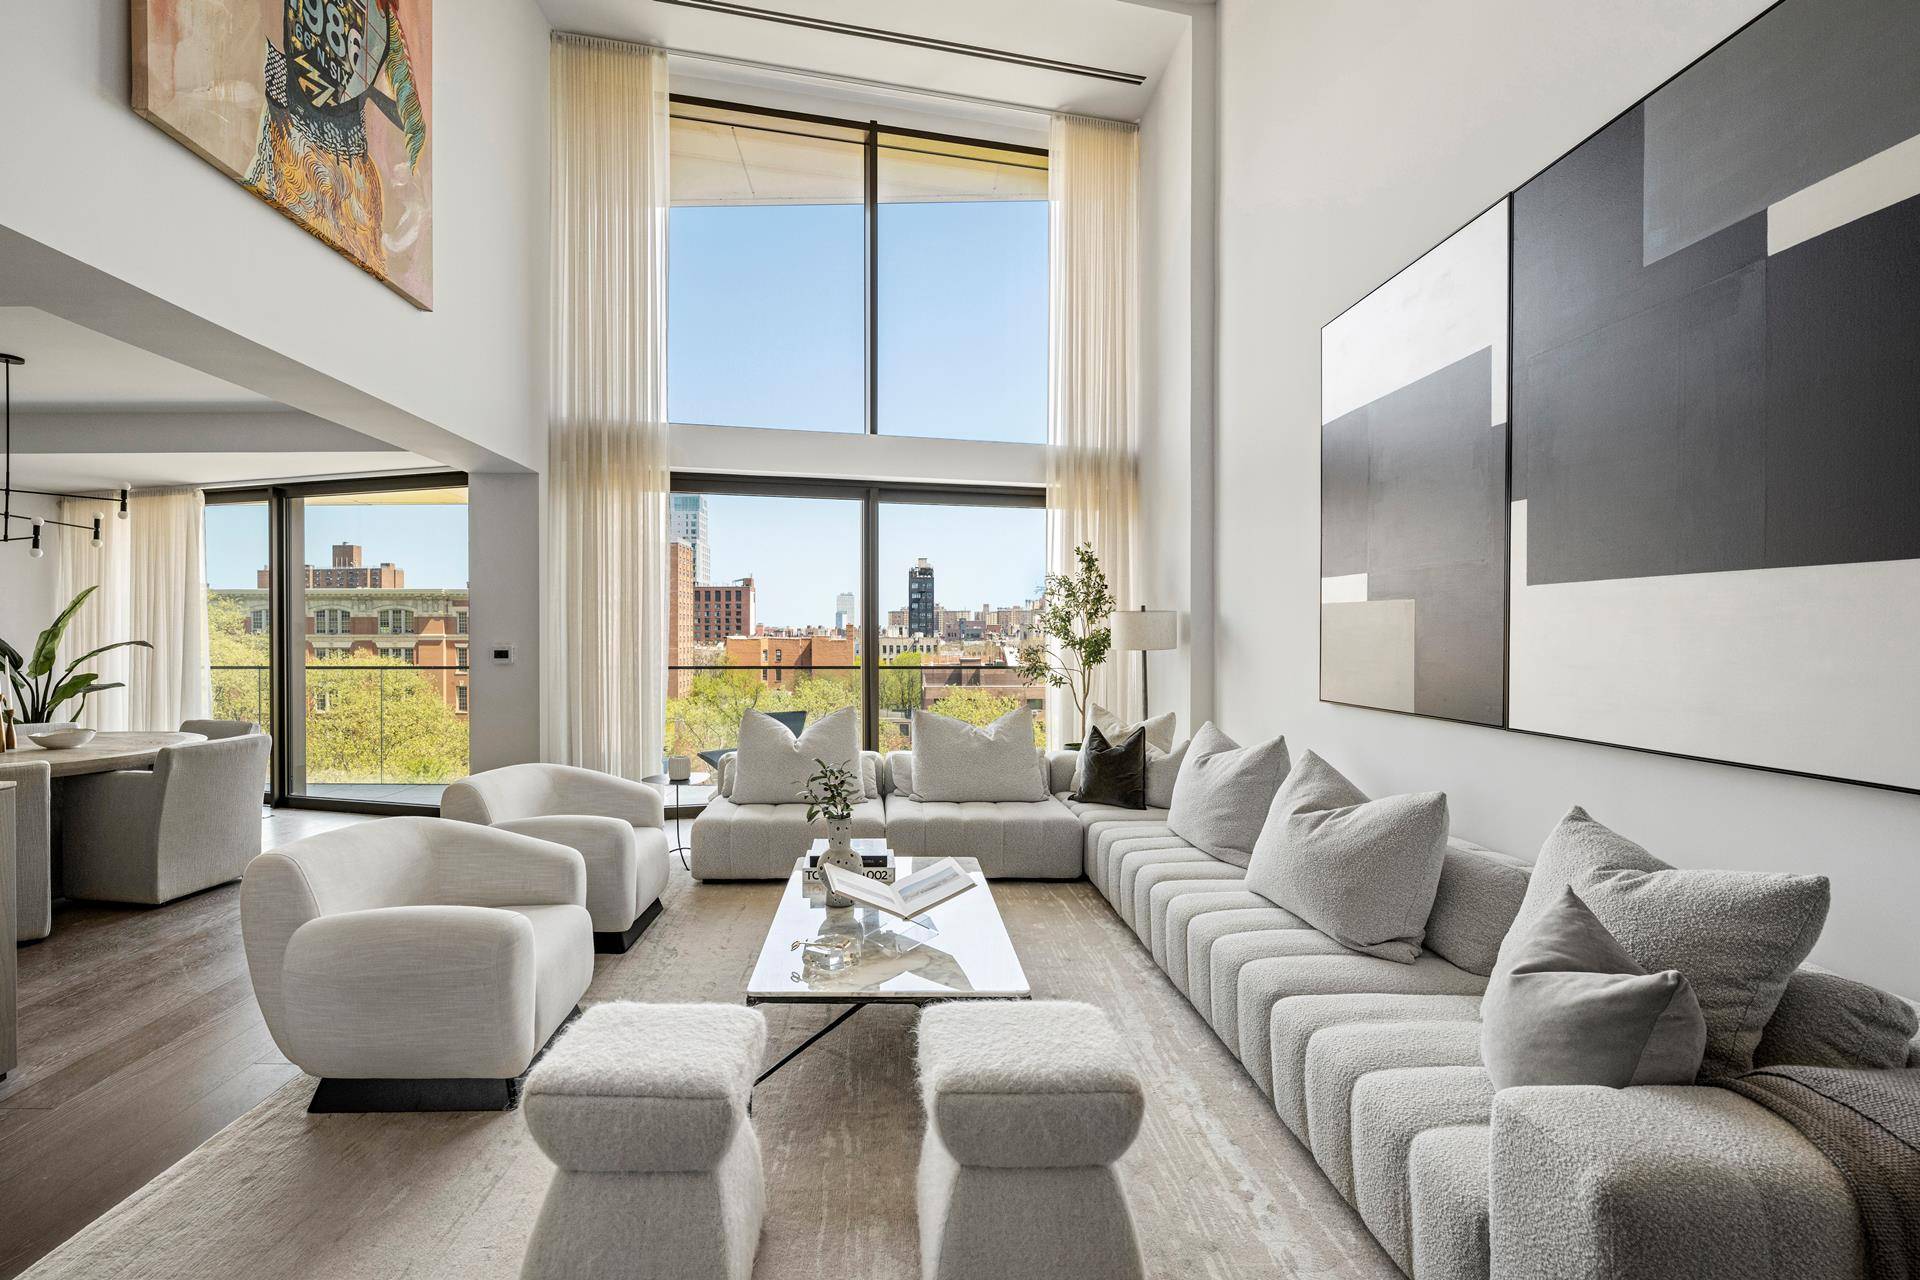 Immediate Occupancy ! Designed by world renowned architect, Thomas Juul Hansen, 199 Chrystie Street presents 14 beautifully crafted interlocking villas that evokes striking architectural design yet remains refined through the ...